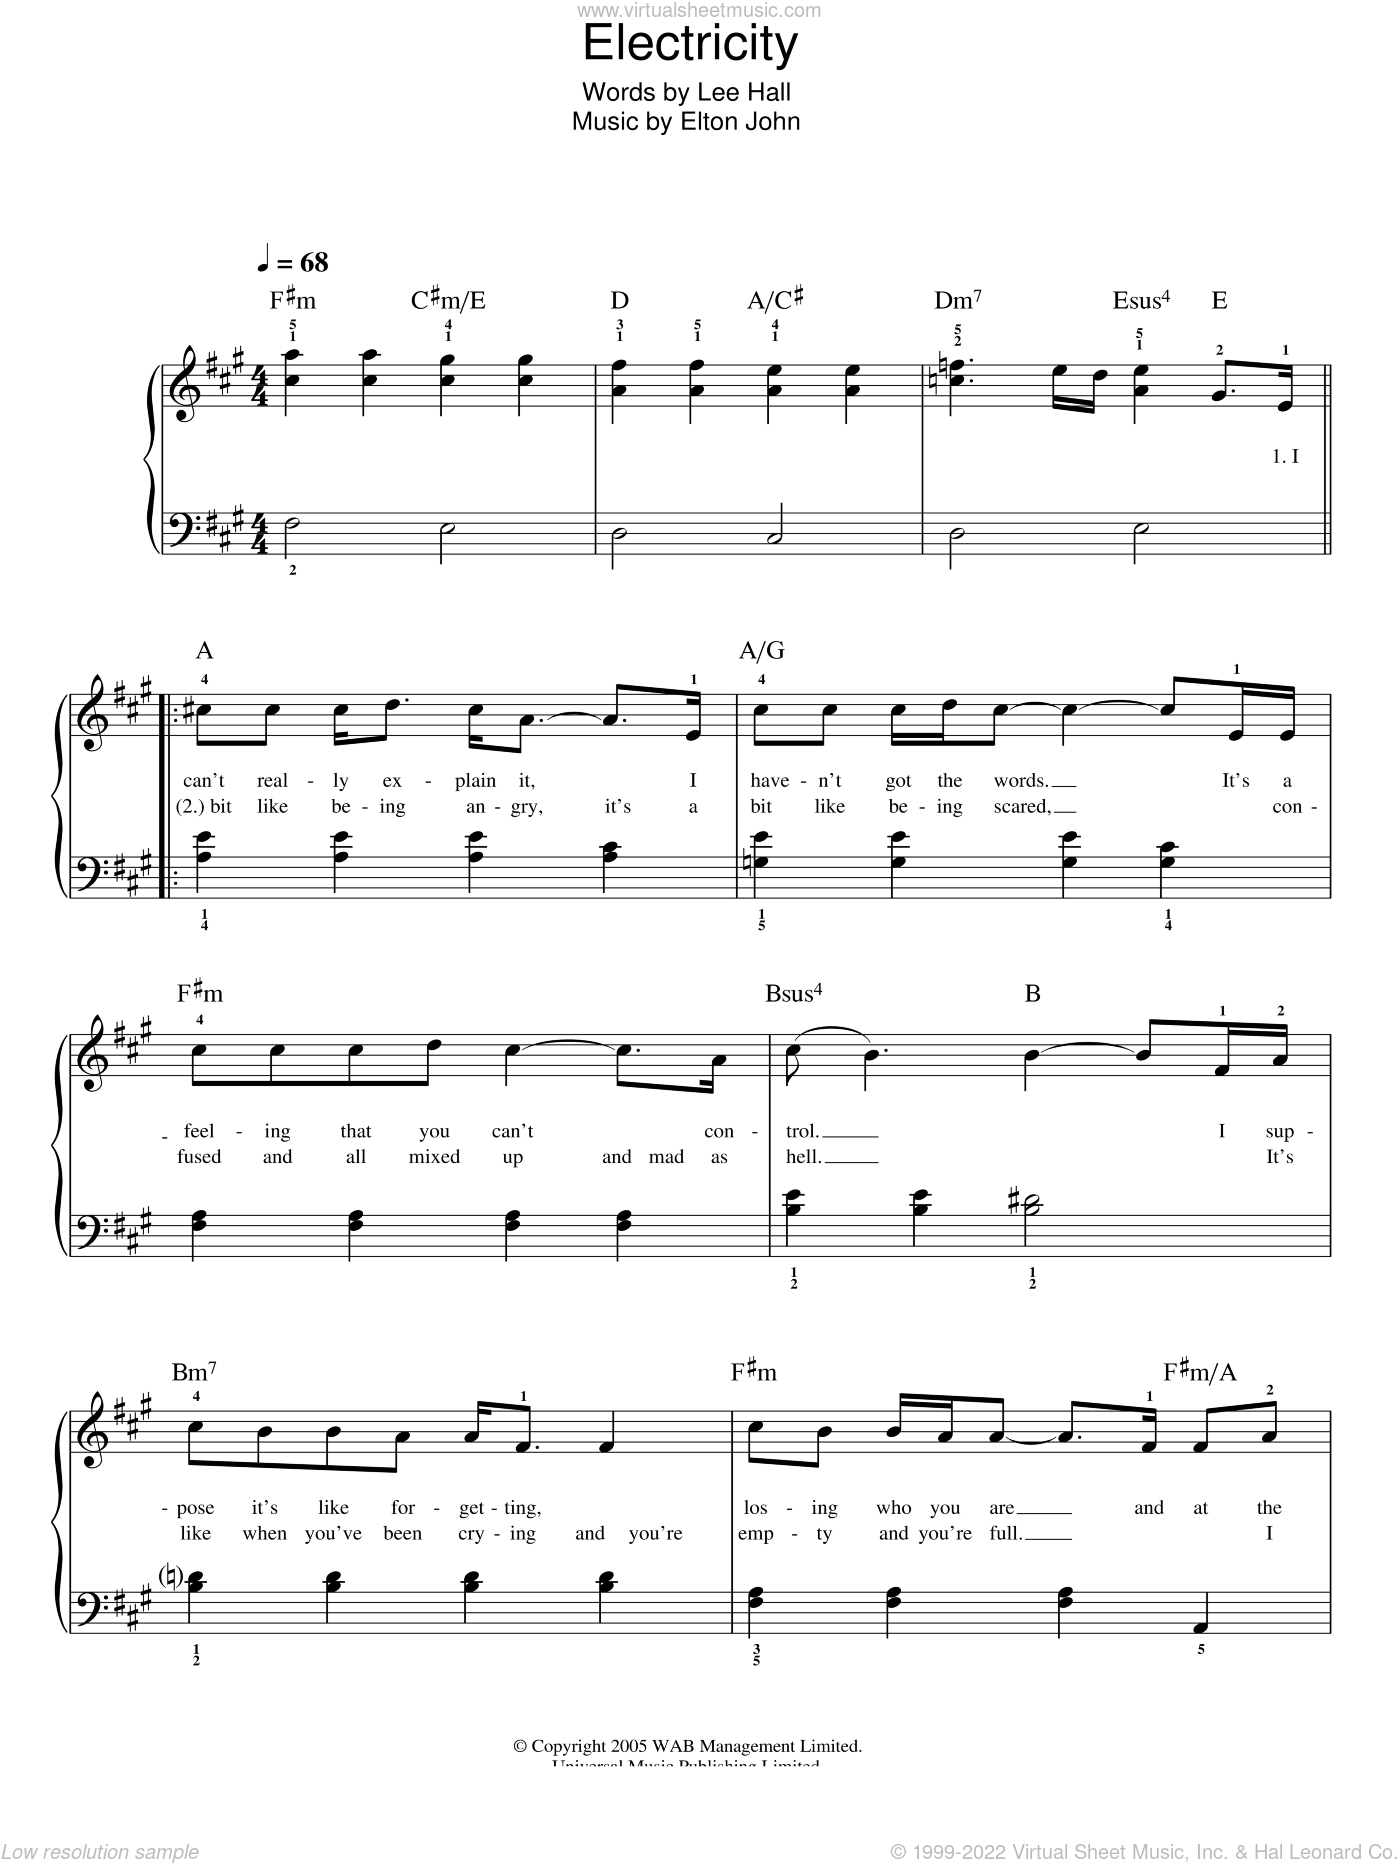 John Electricity Sheet Music Easy For Piano Solo Pdf